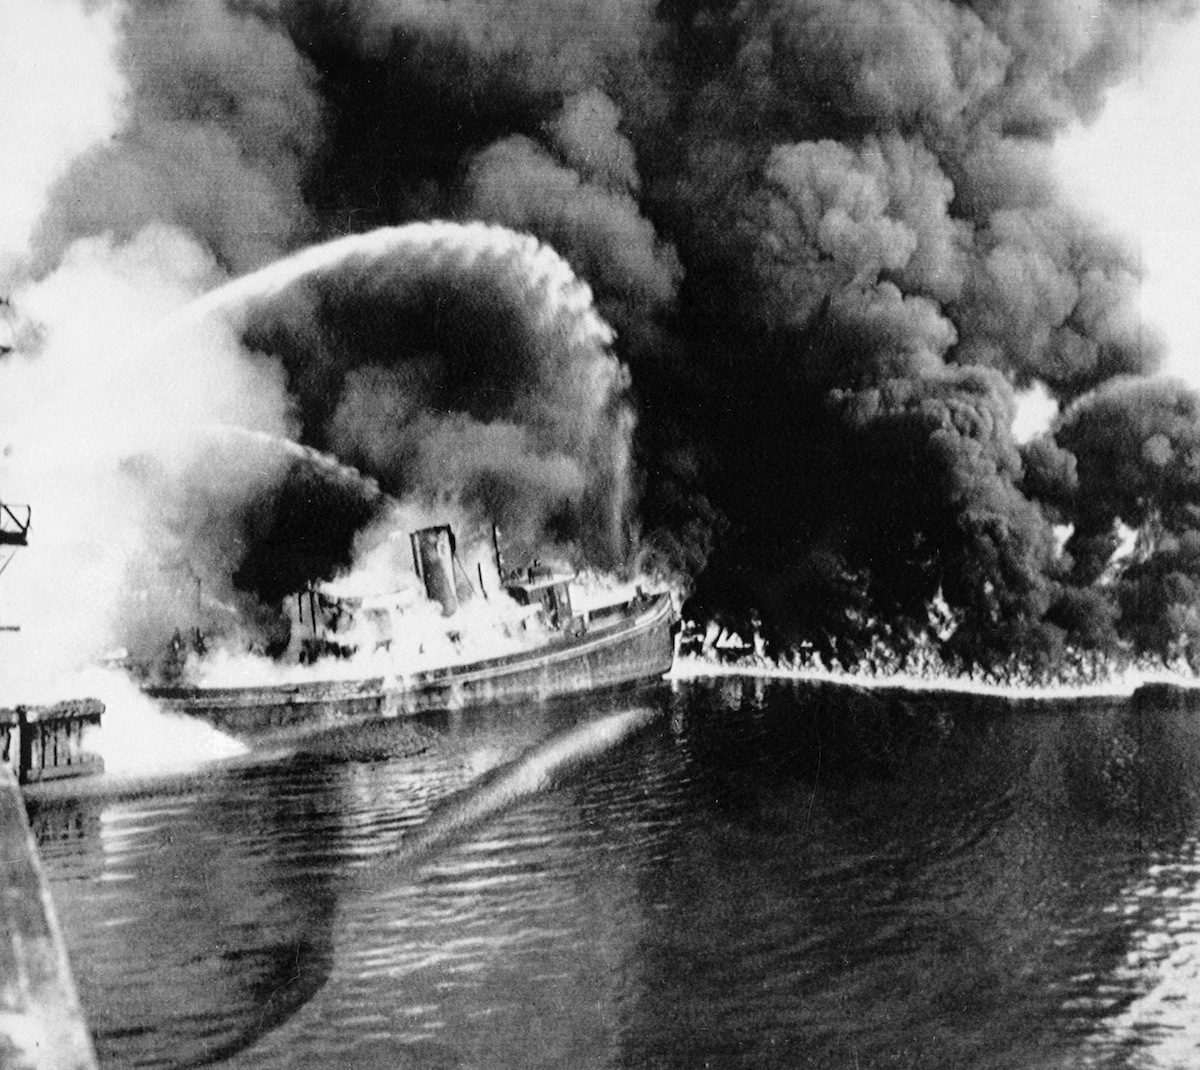 A fire tug fights flames on the Cuyahoga River near downtown Cleveland on June 25, 1952. (AP Images)